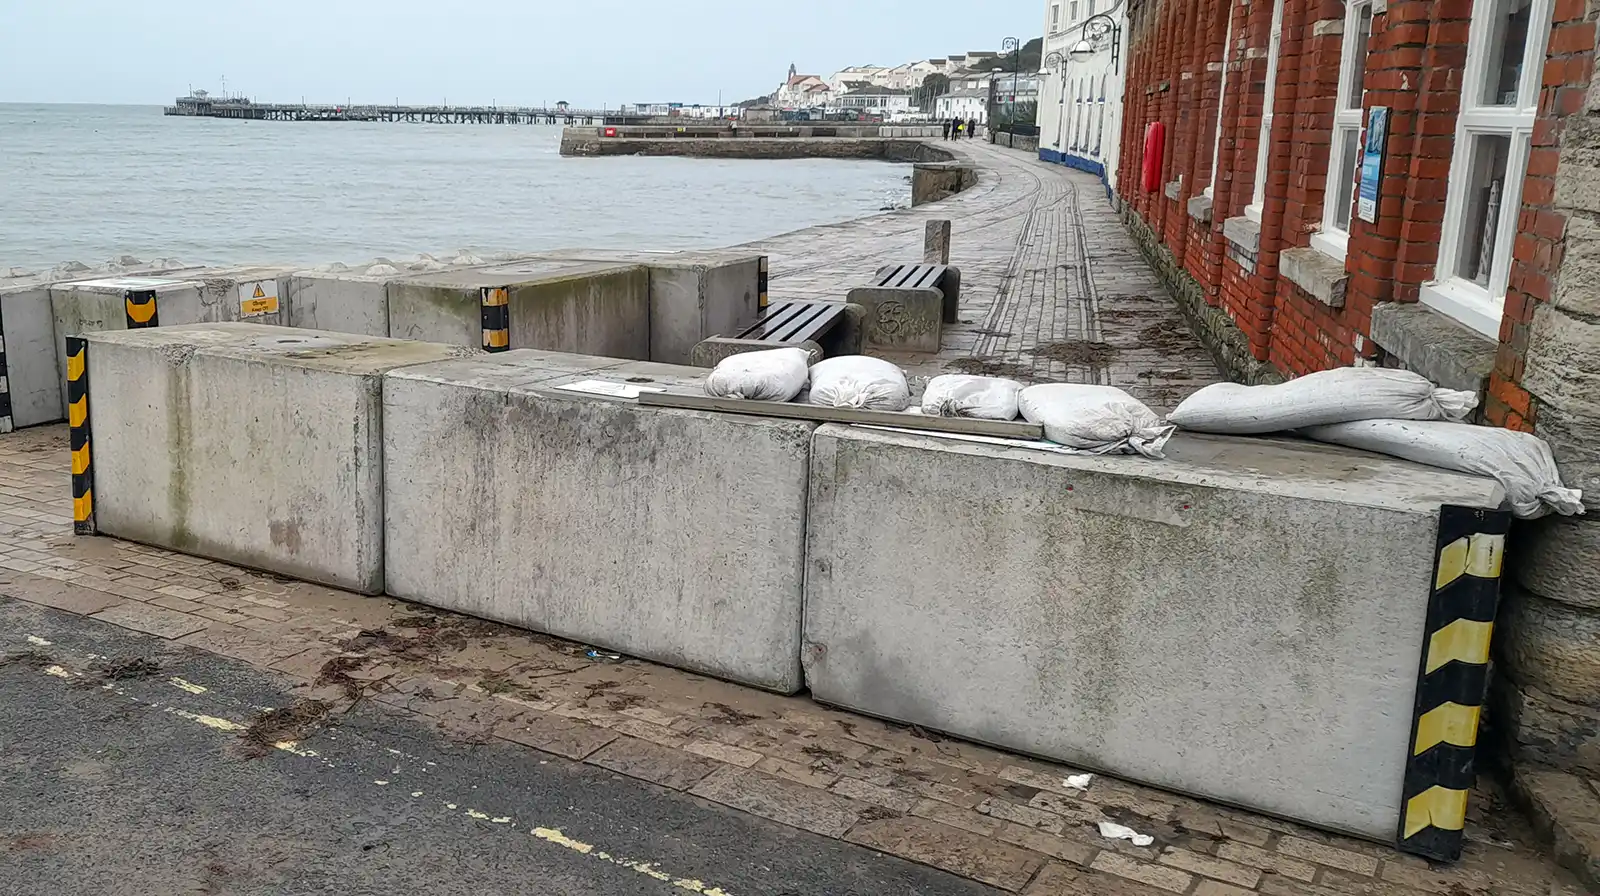 The defences in Swanage before the art was installed. Pictures: Sara Parker